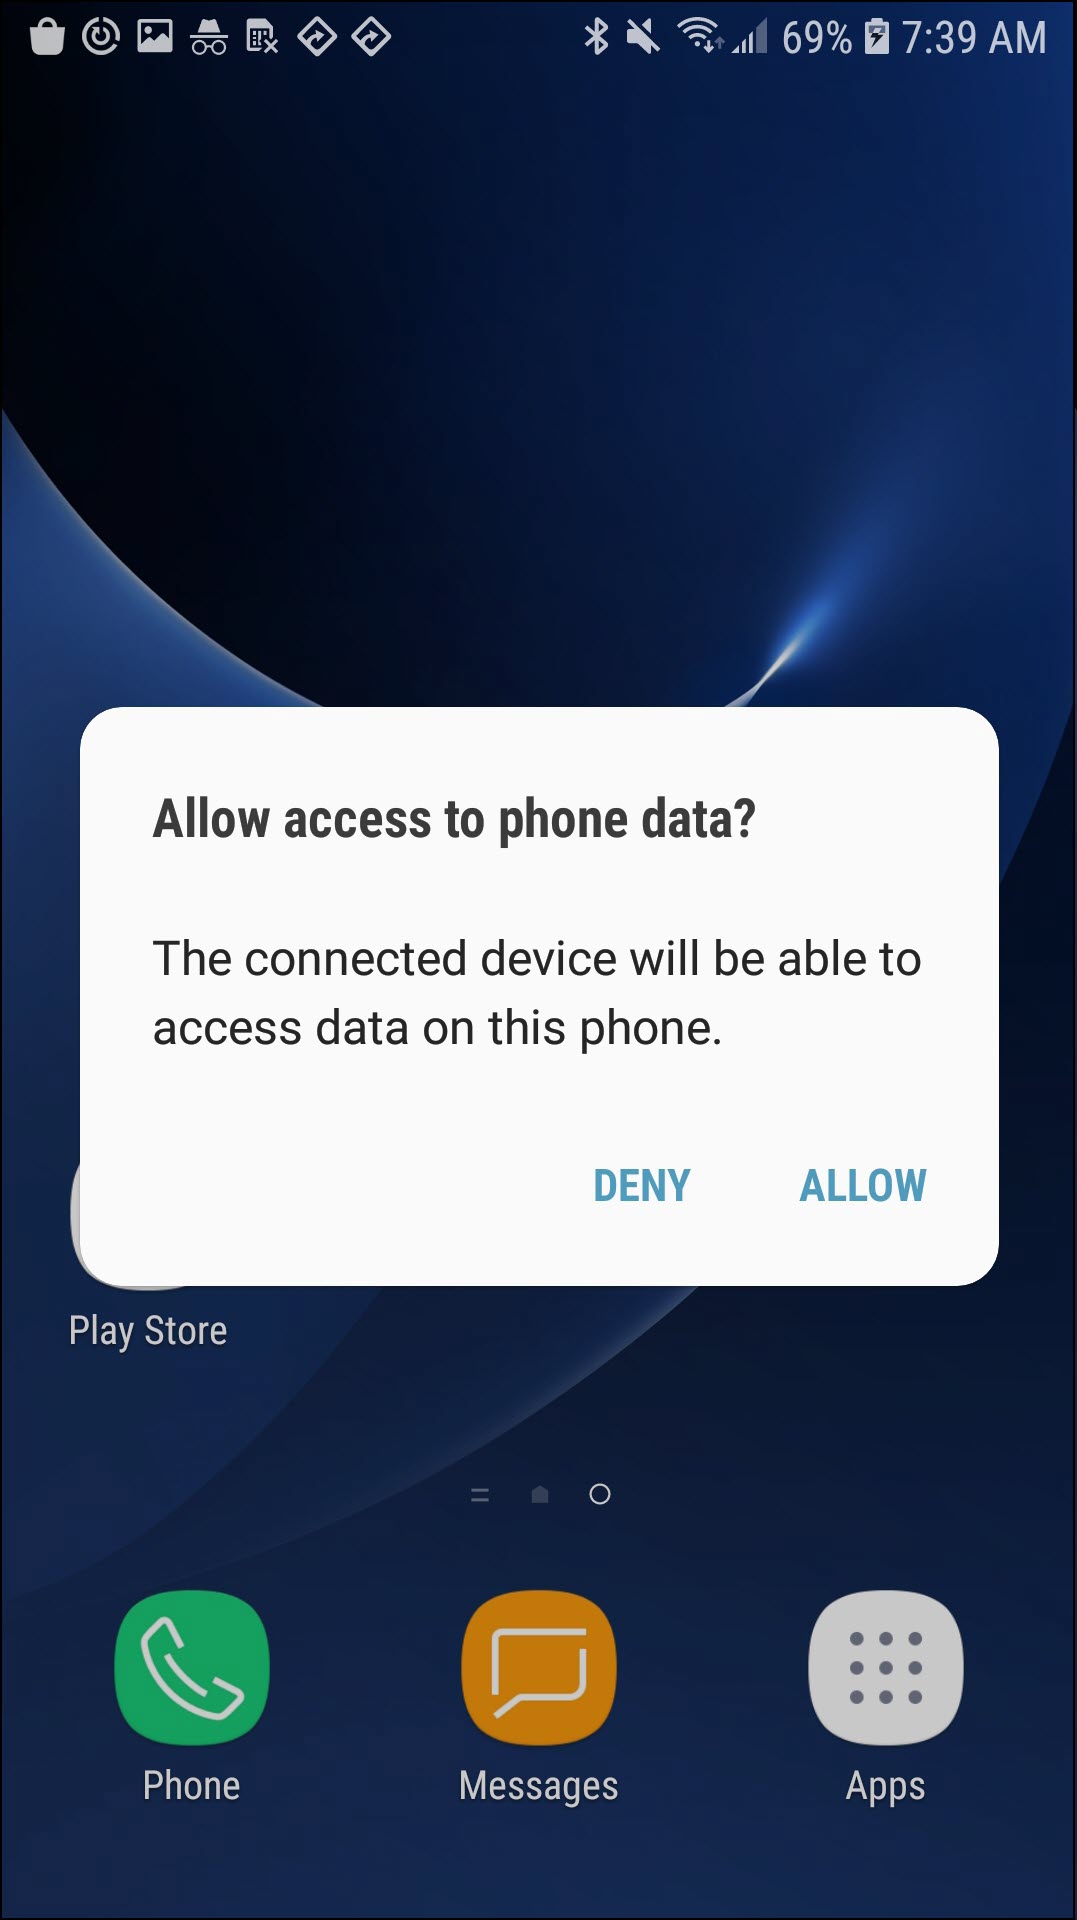 Connecting the Android device to a computer